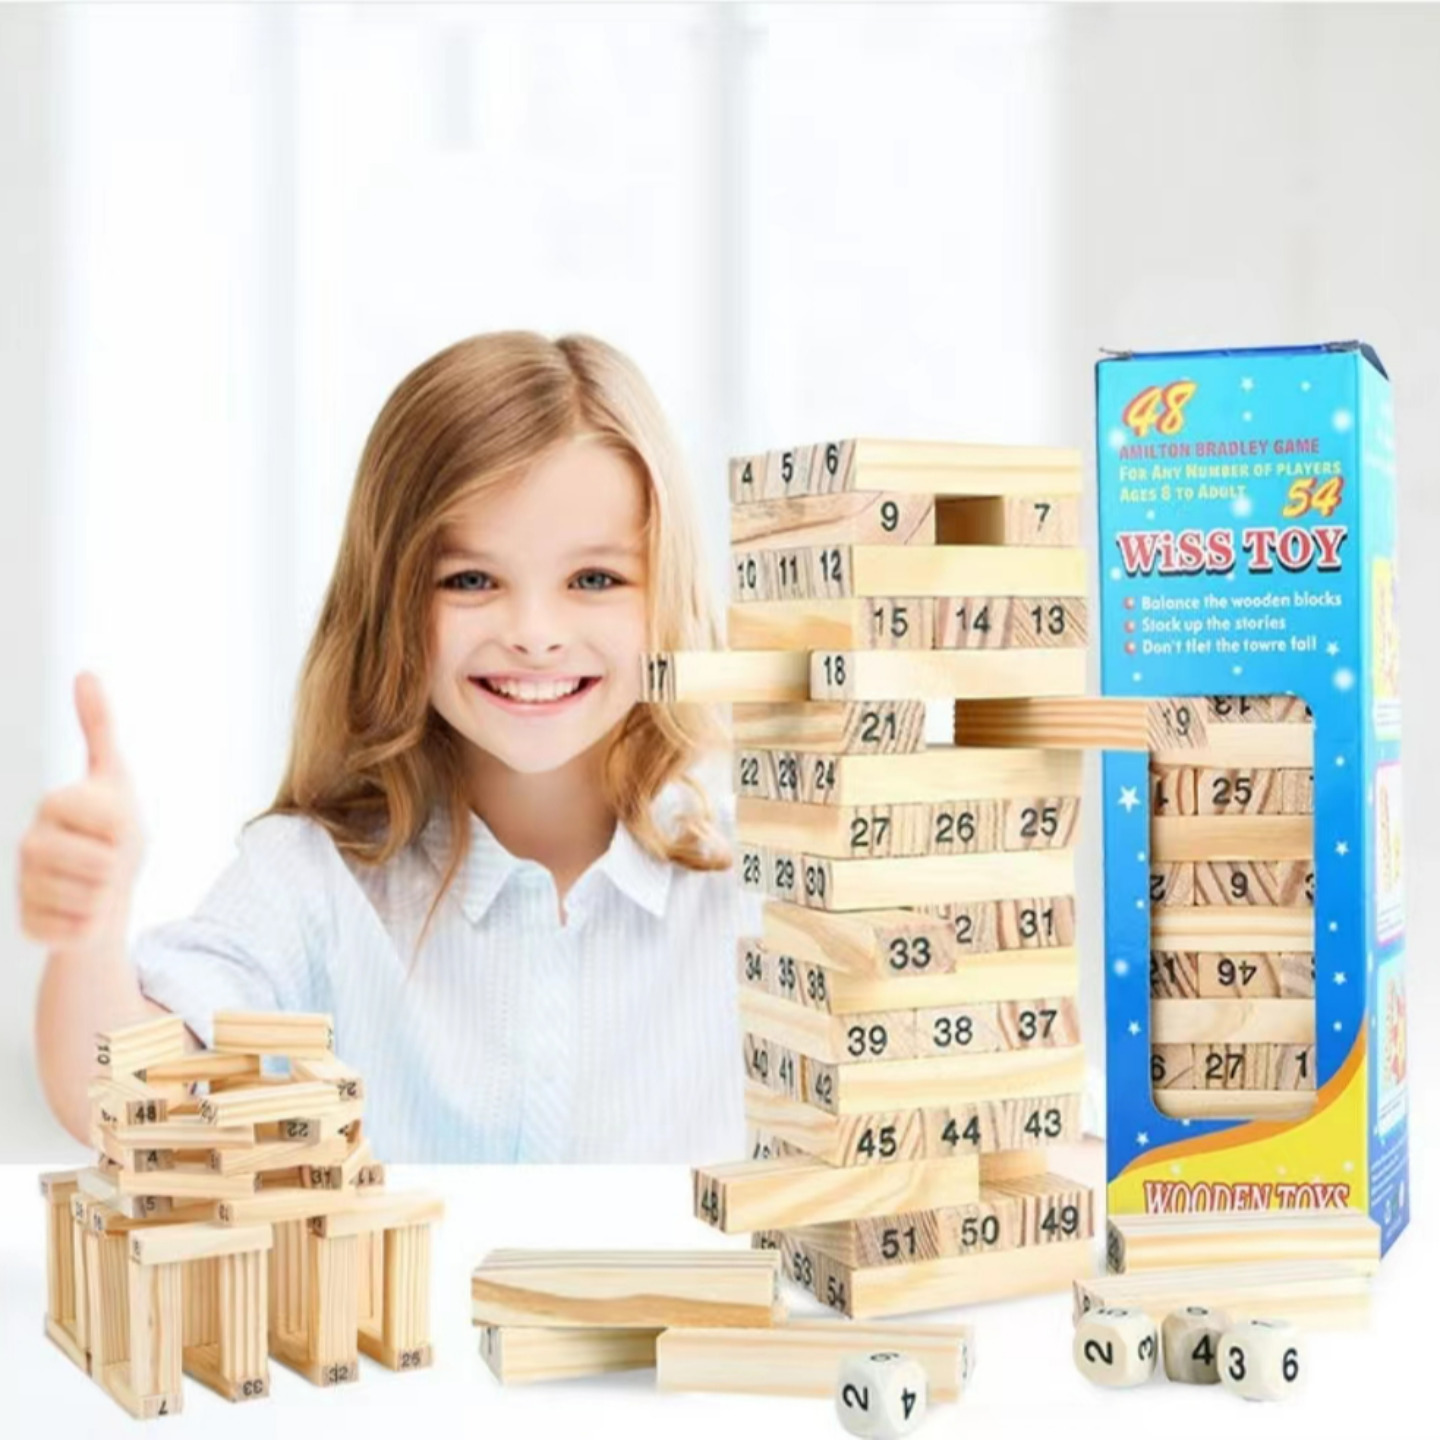 Classic Wooden Jenga Stack Game with Numbers and Dice for Party Games